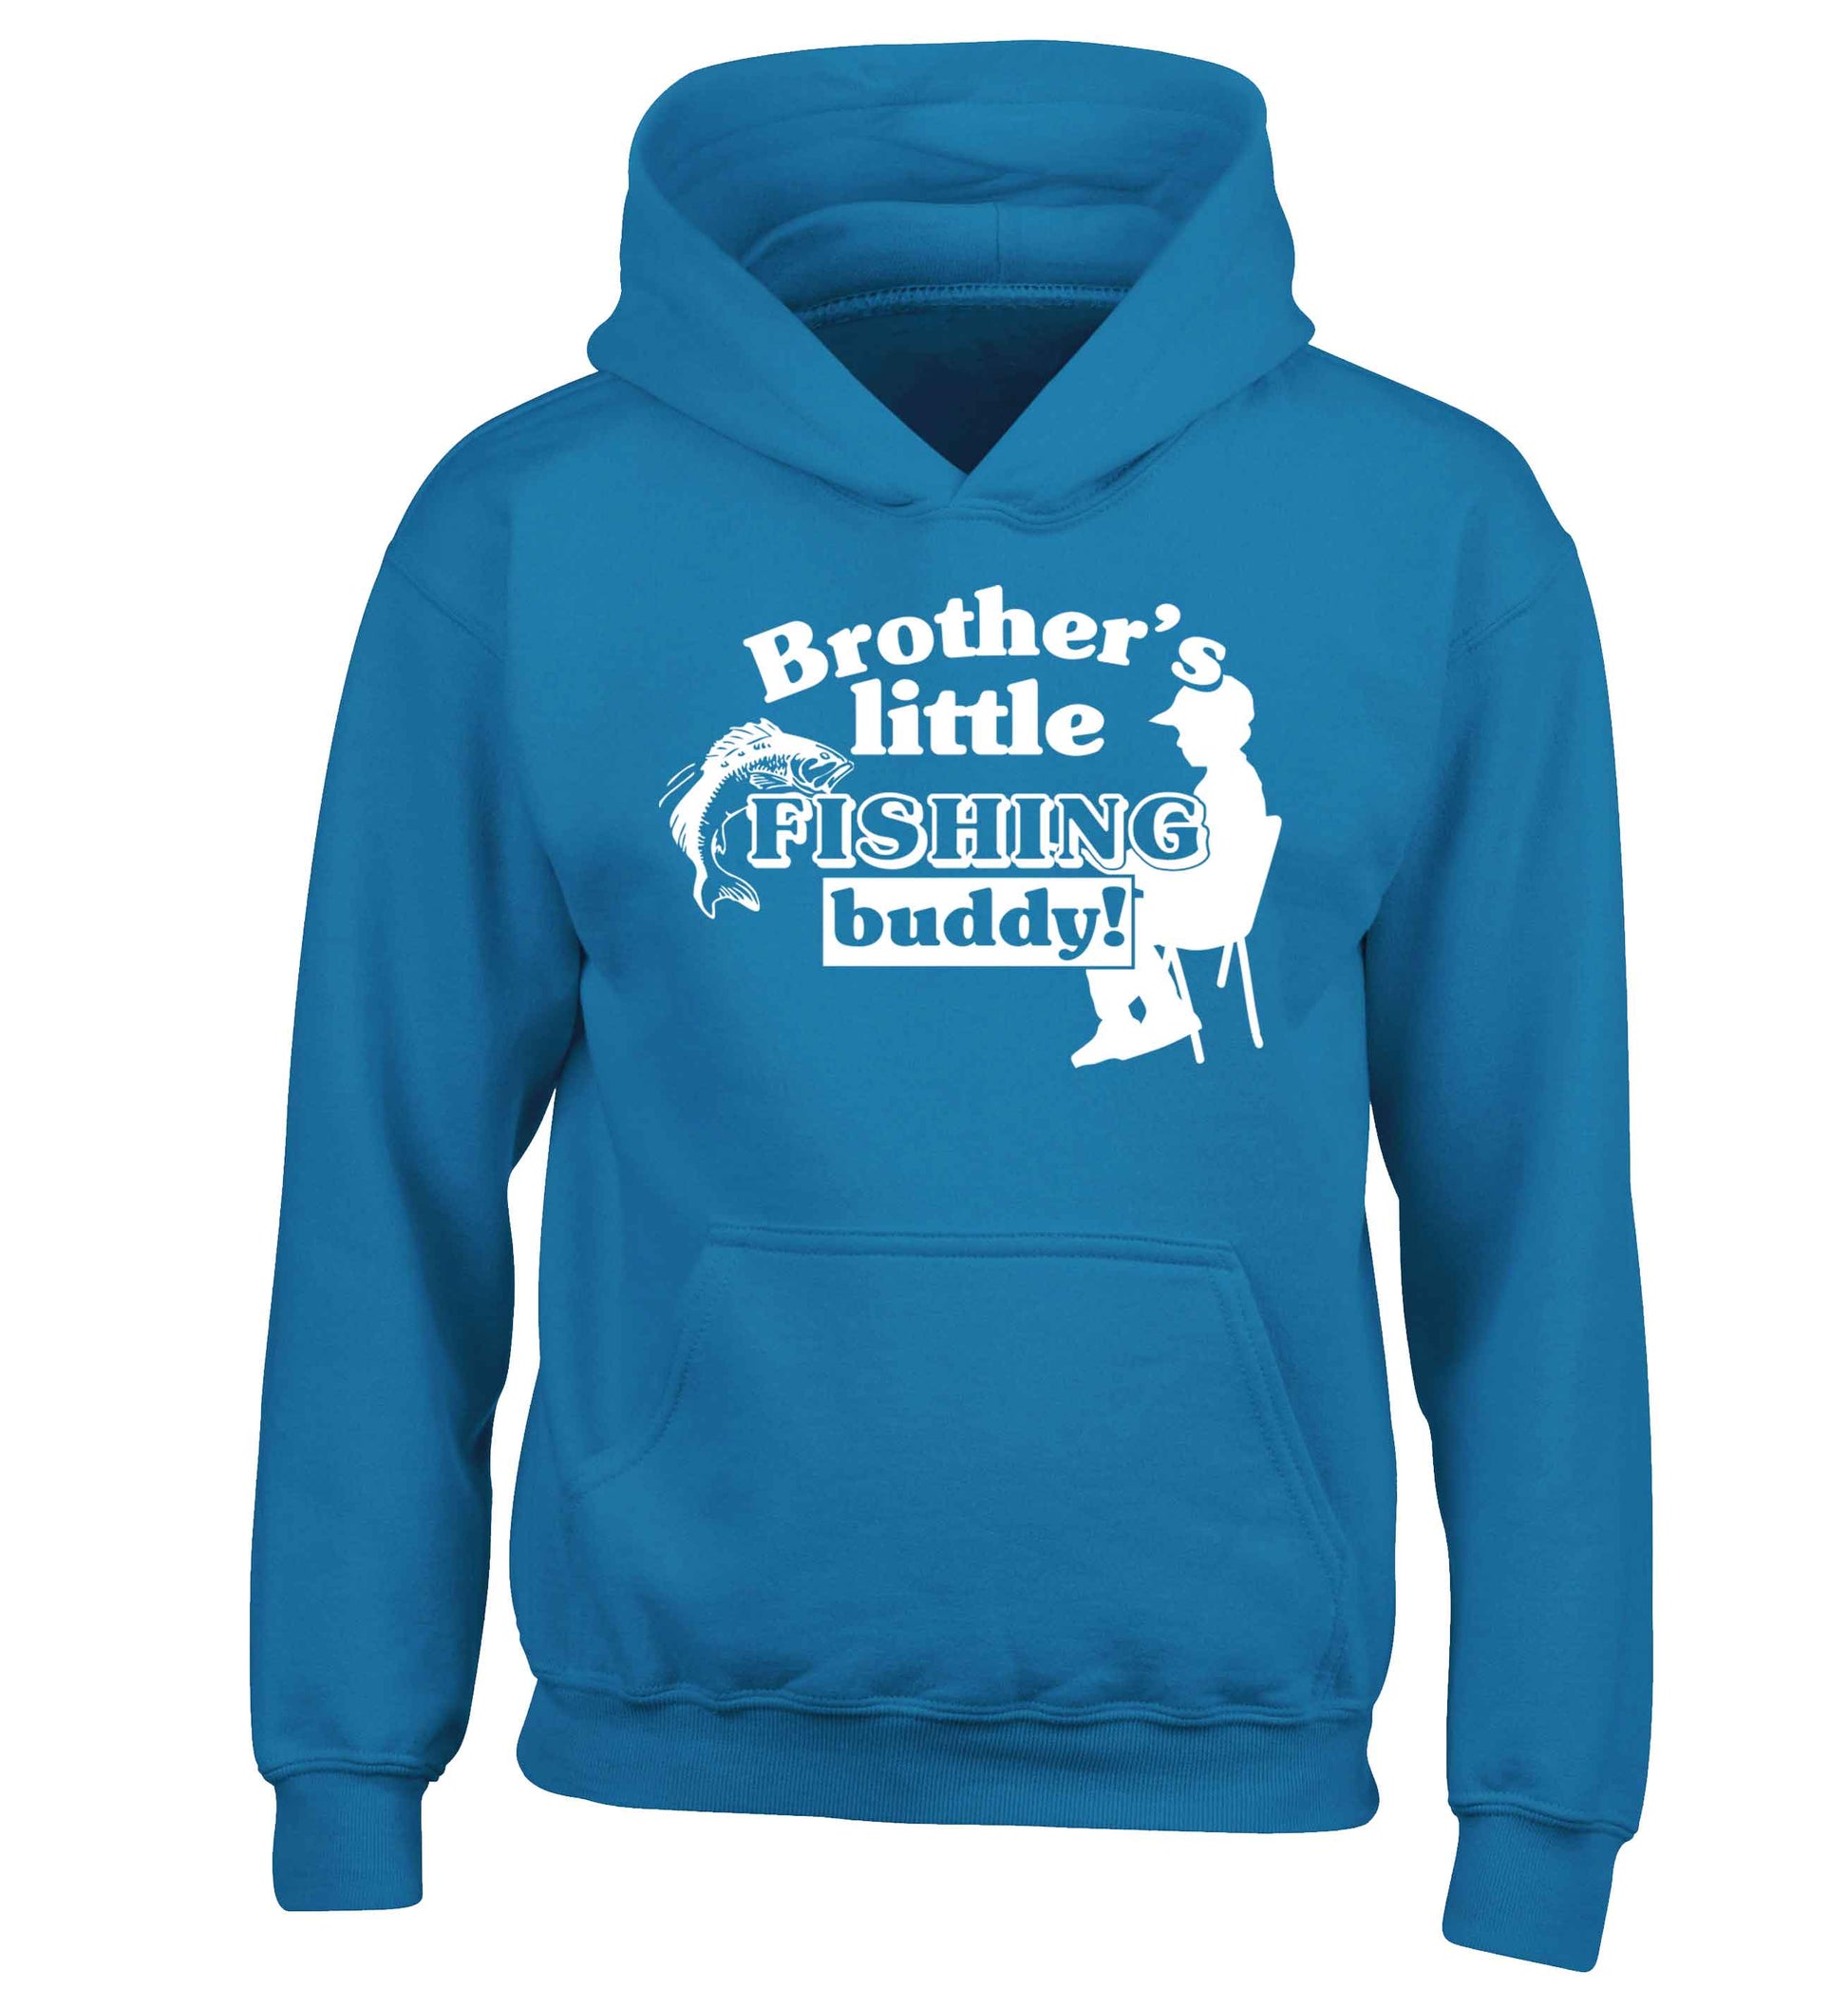 Brother's little fishing buddy children's blue hoodie 12-13 Years